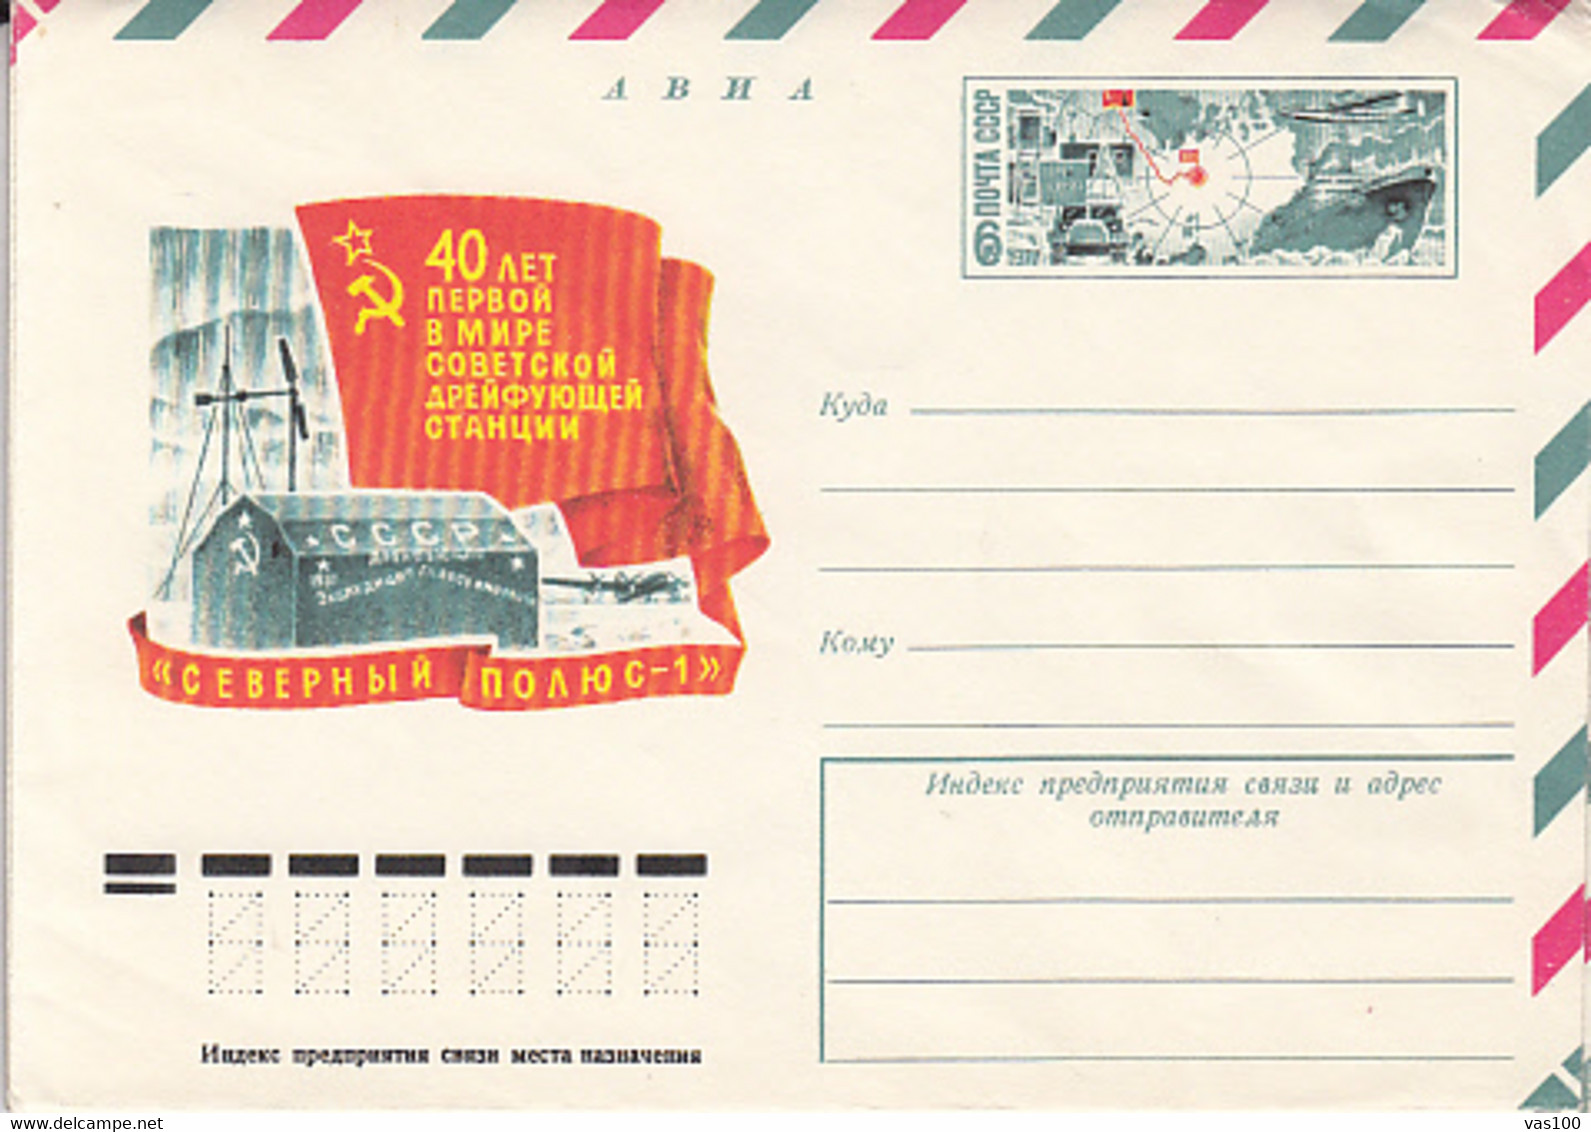 NORTH POLE, ARCTIC STATIONS, NORTH POLE 1, COVER STATIONERY, ENTIER POSTAL, 1977, RUSSIA - Scientific Stations & Arctic Drifting Stations